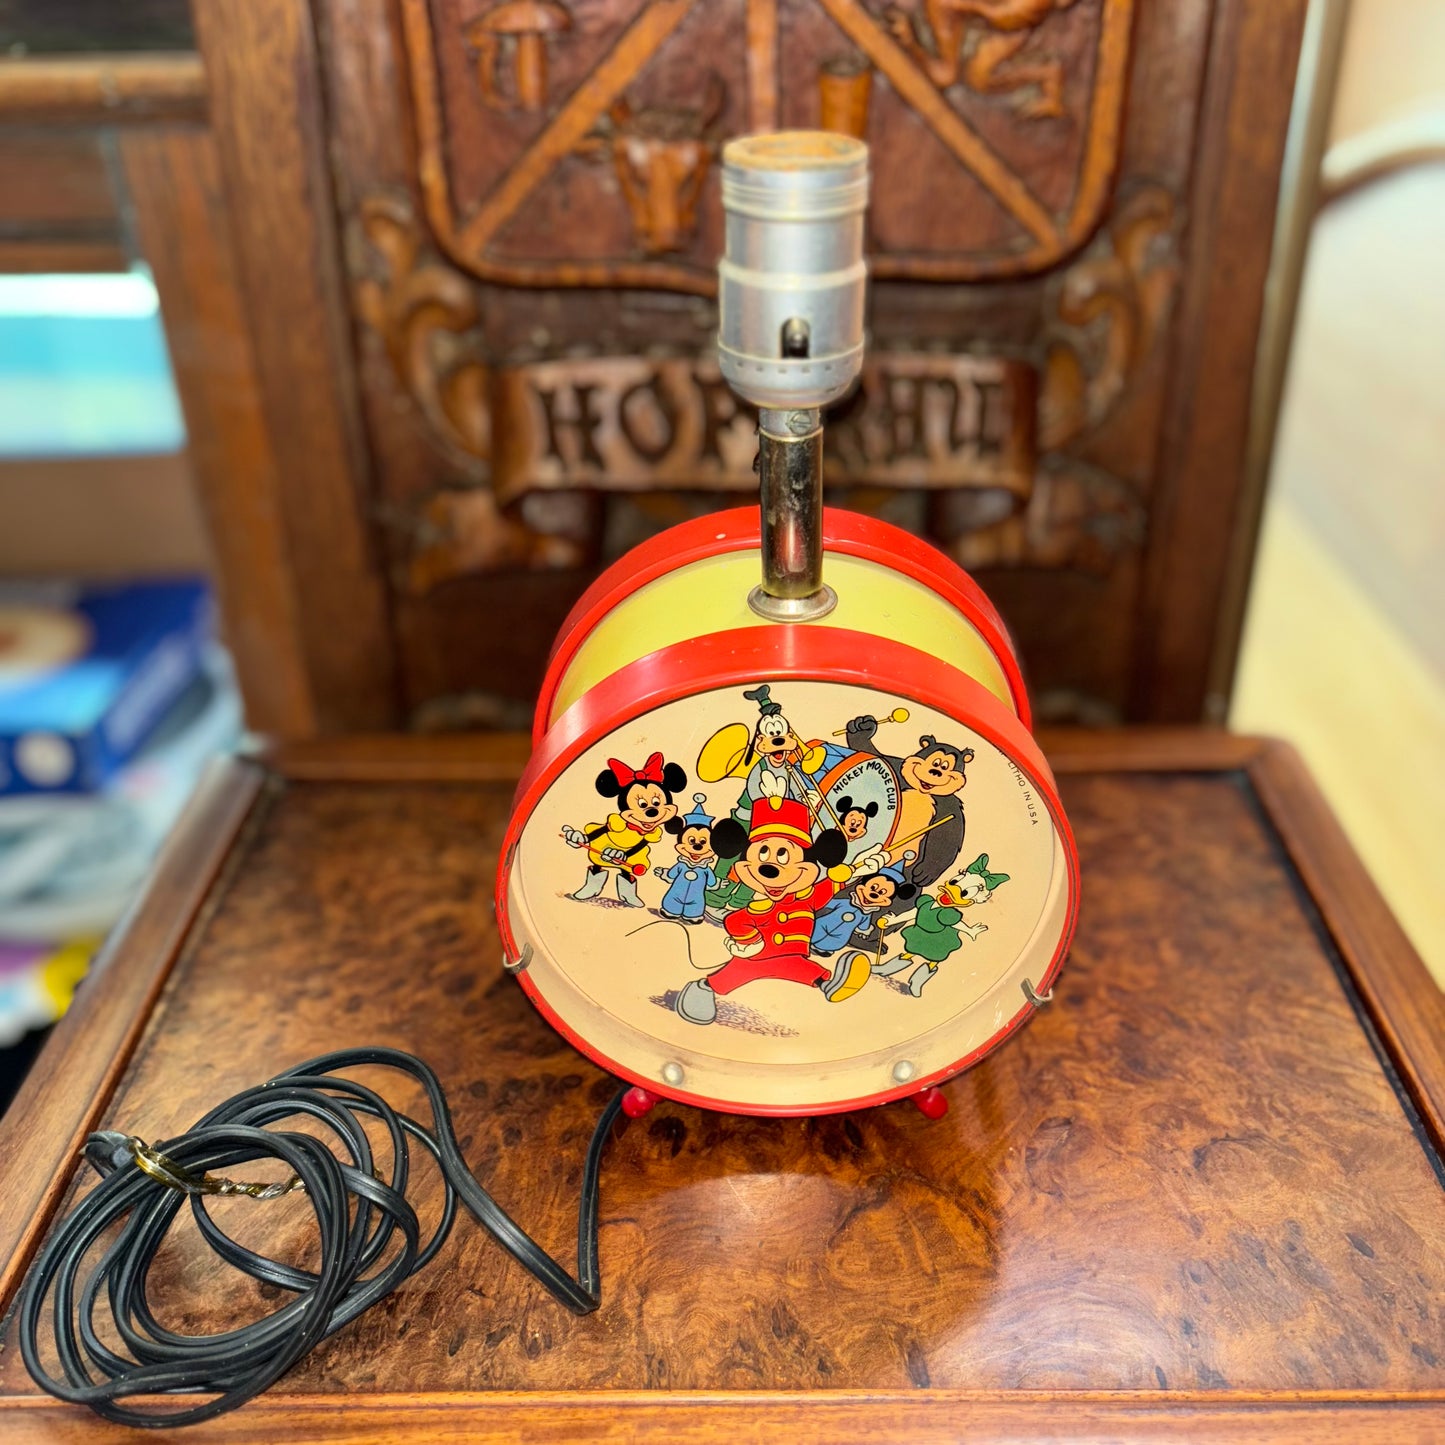 Vintage 1950s Disney Mickey Mouse Club Drum Lamp By Econonlite (WITHOUT the lamp shade)